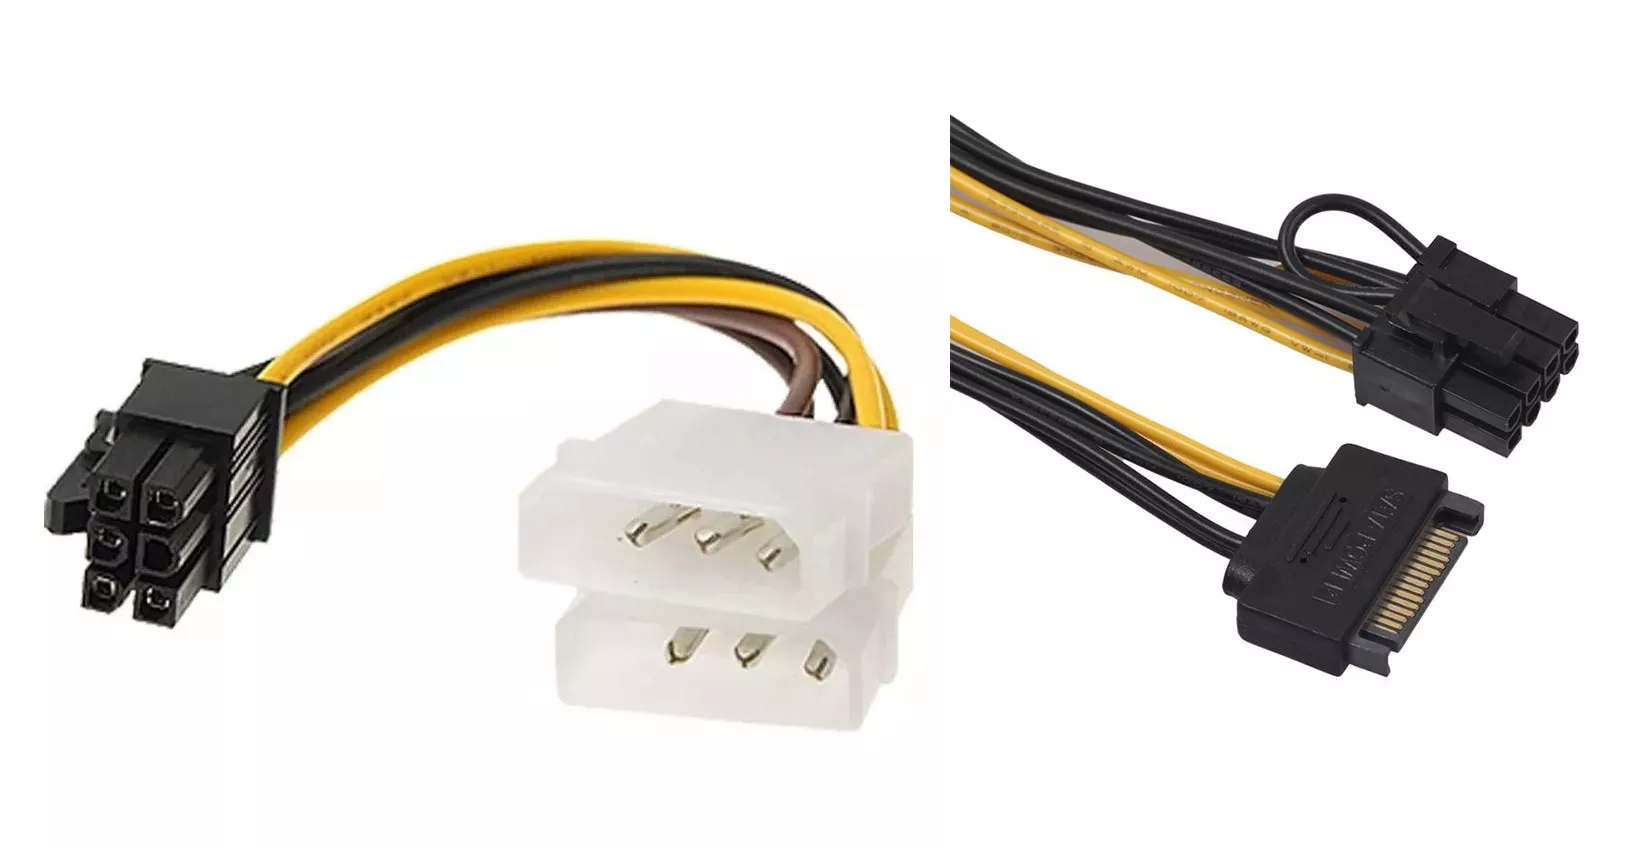 https://www.xgamertechnologies.com/images/products/2x Molex TO 6 Pin_SATA to 8pin PCI Express Power Adapter Cable for Graphics Card.webp